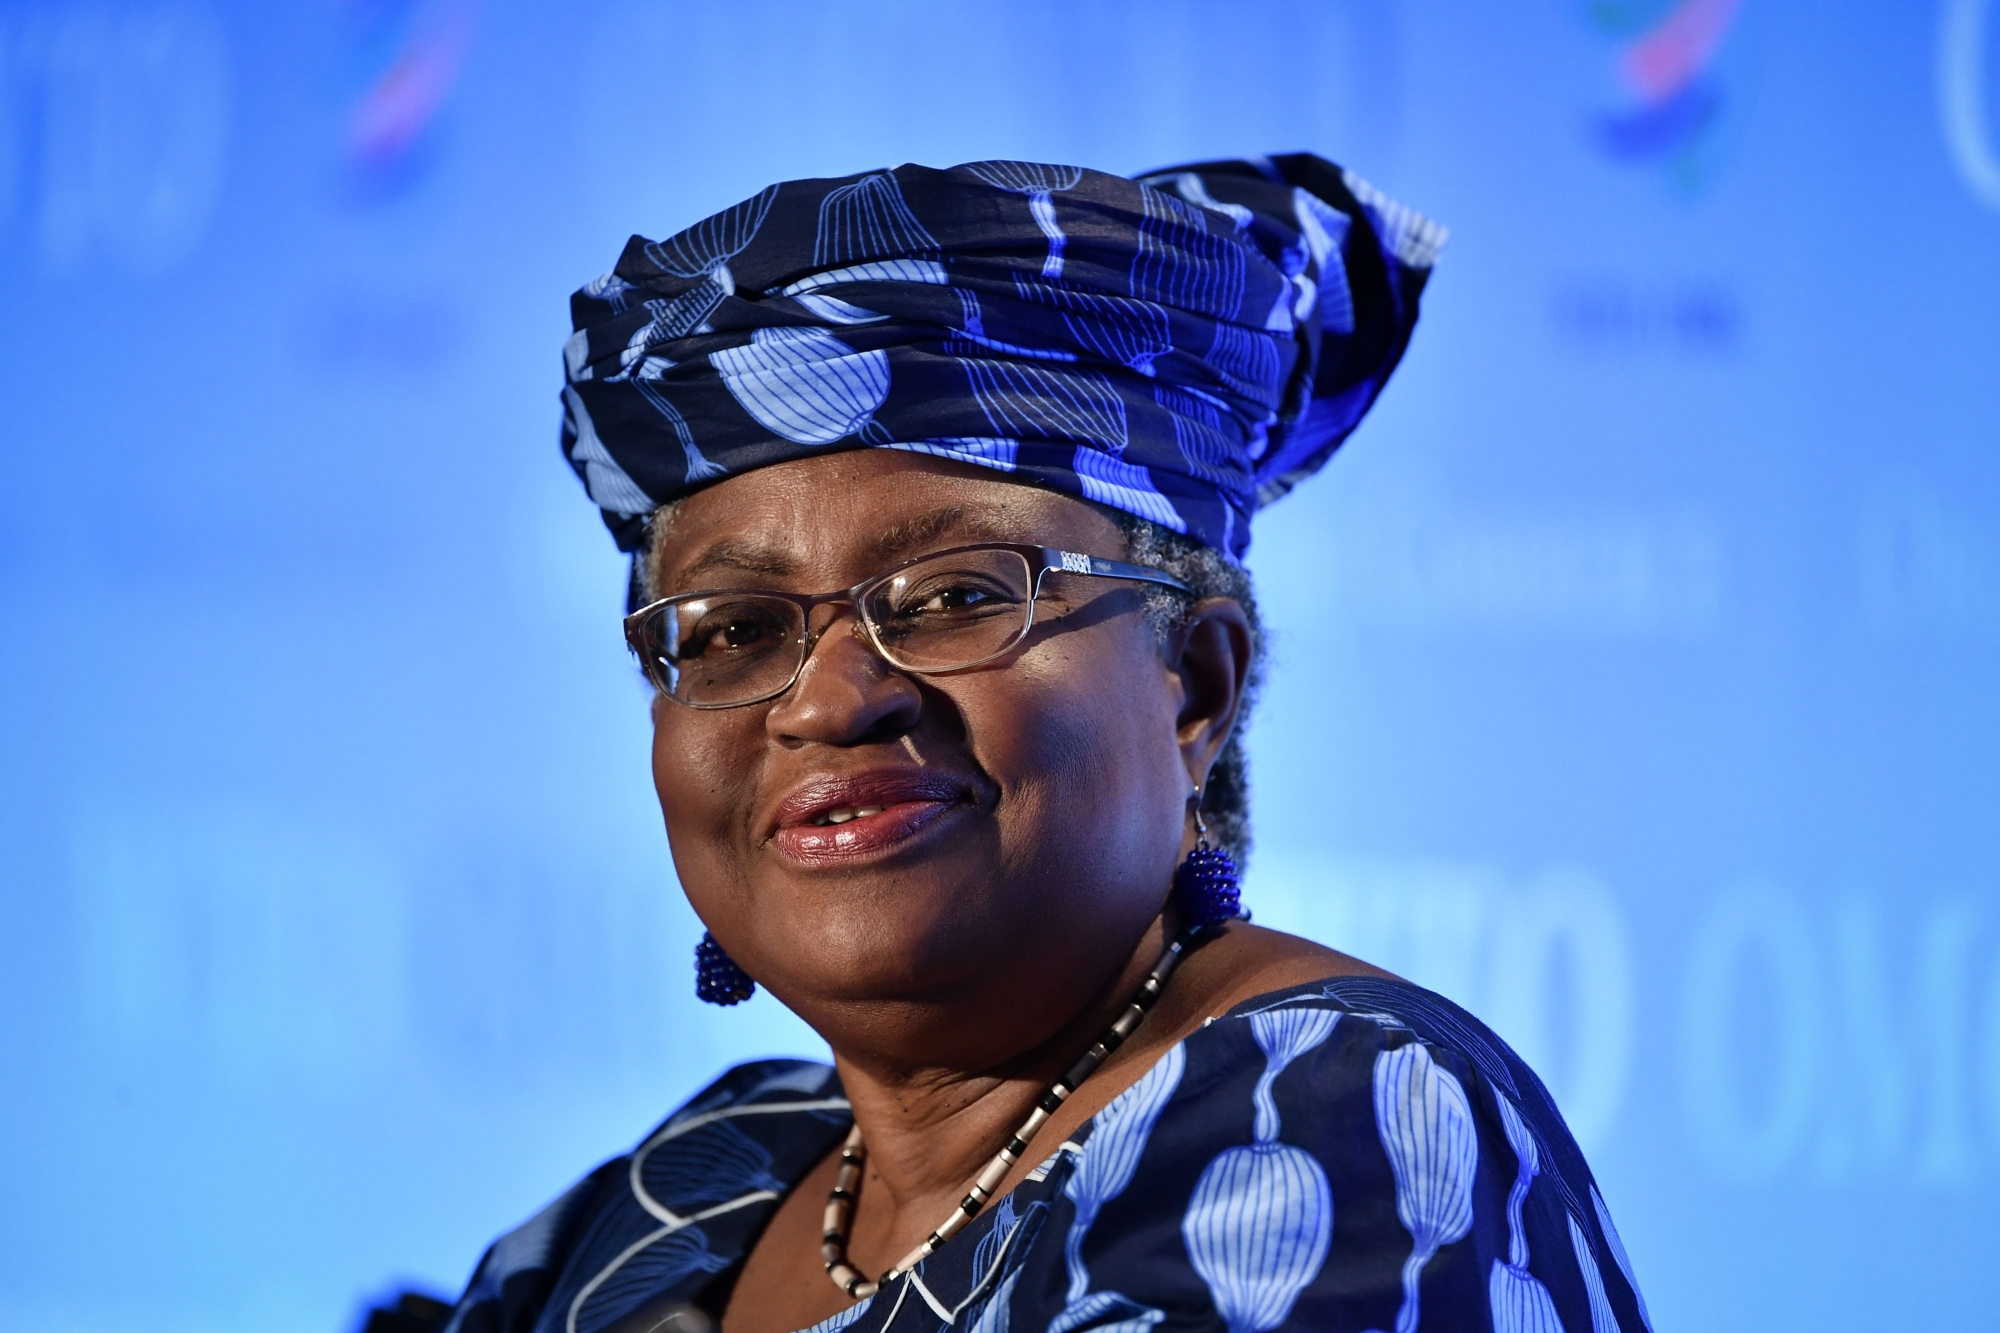 (FILES) In this file photo taken on July 15, 2020 Nigerian former Foreign and Finance Minister Ngozi Okonjo-Iweala smiles during a press conference in Geneva, following her hearing before World Trade Organization 164 member states' representatives, as part of the application process to head the WTO as Director General. - Key WTO ambassadors tapped Nigeria's Ngozi Okonjo-Iweala on October 26, 2020 as the best pick to lead the organisation, but she was opposed by Washington, who said it supported South Korean Trade Minister Yoo Myung-hee instead. The so-called troika of ambassadors heading the World Trade Organization's three main branches determined after four months of consultations with member states that Okonjo-Iweala was the most likely to obtain the consensus needed to take the top job, paving the way for her to become the first woman and the first African at its helm. (Photo by Fabrice COFFRINI / AFP) (KEYSTONE/AFP / AFP/FABRICE COFFRINI)